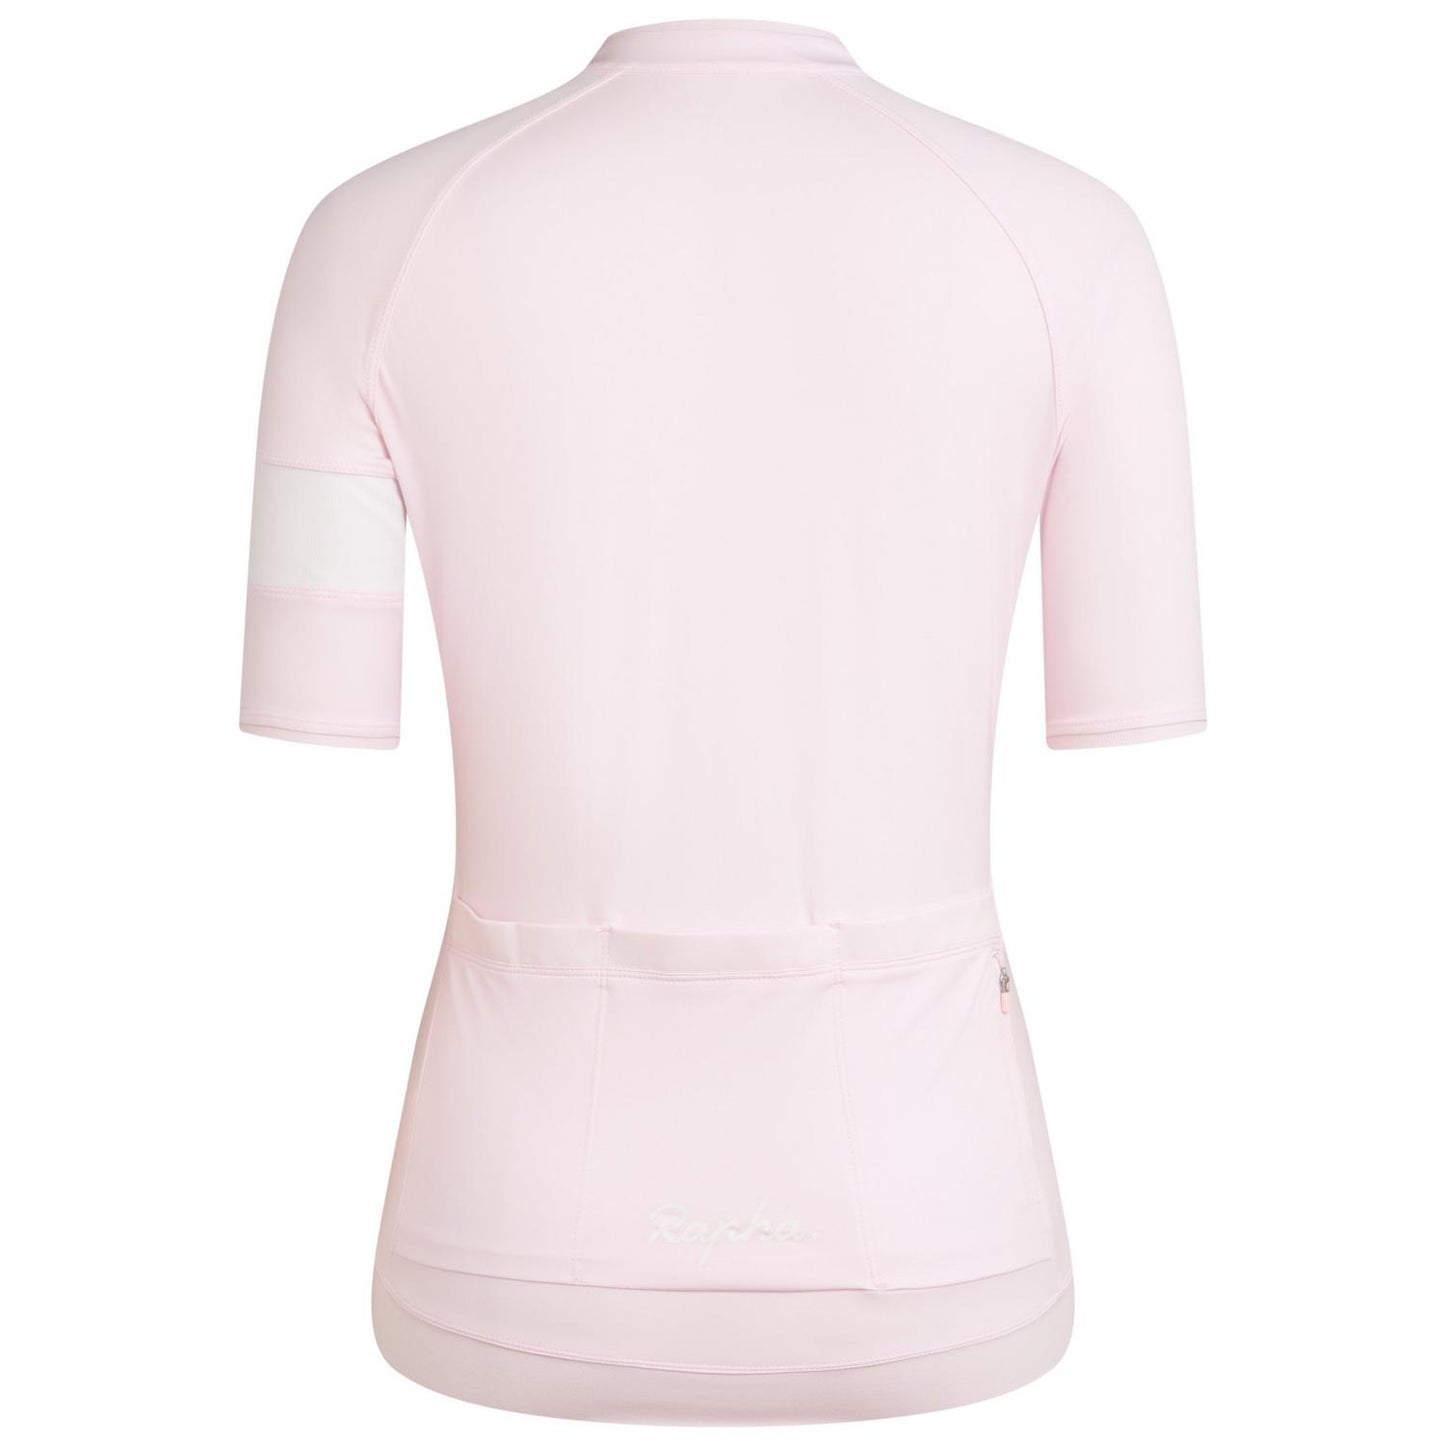 RAPHA Core Maillot Chica - BSW Pale Pink/White